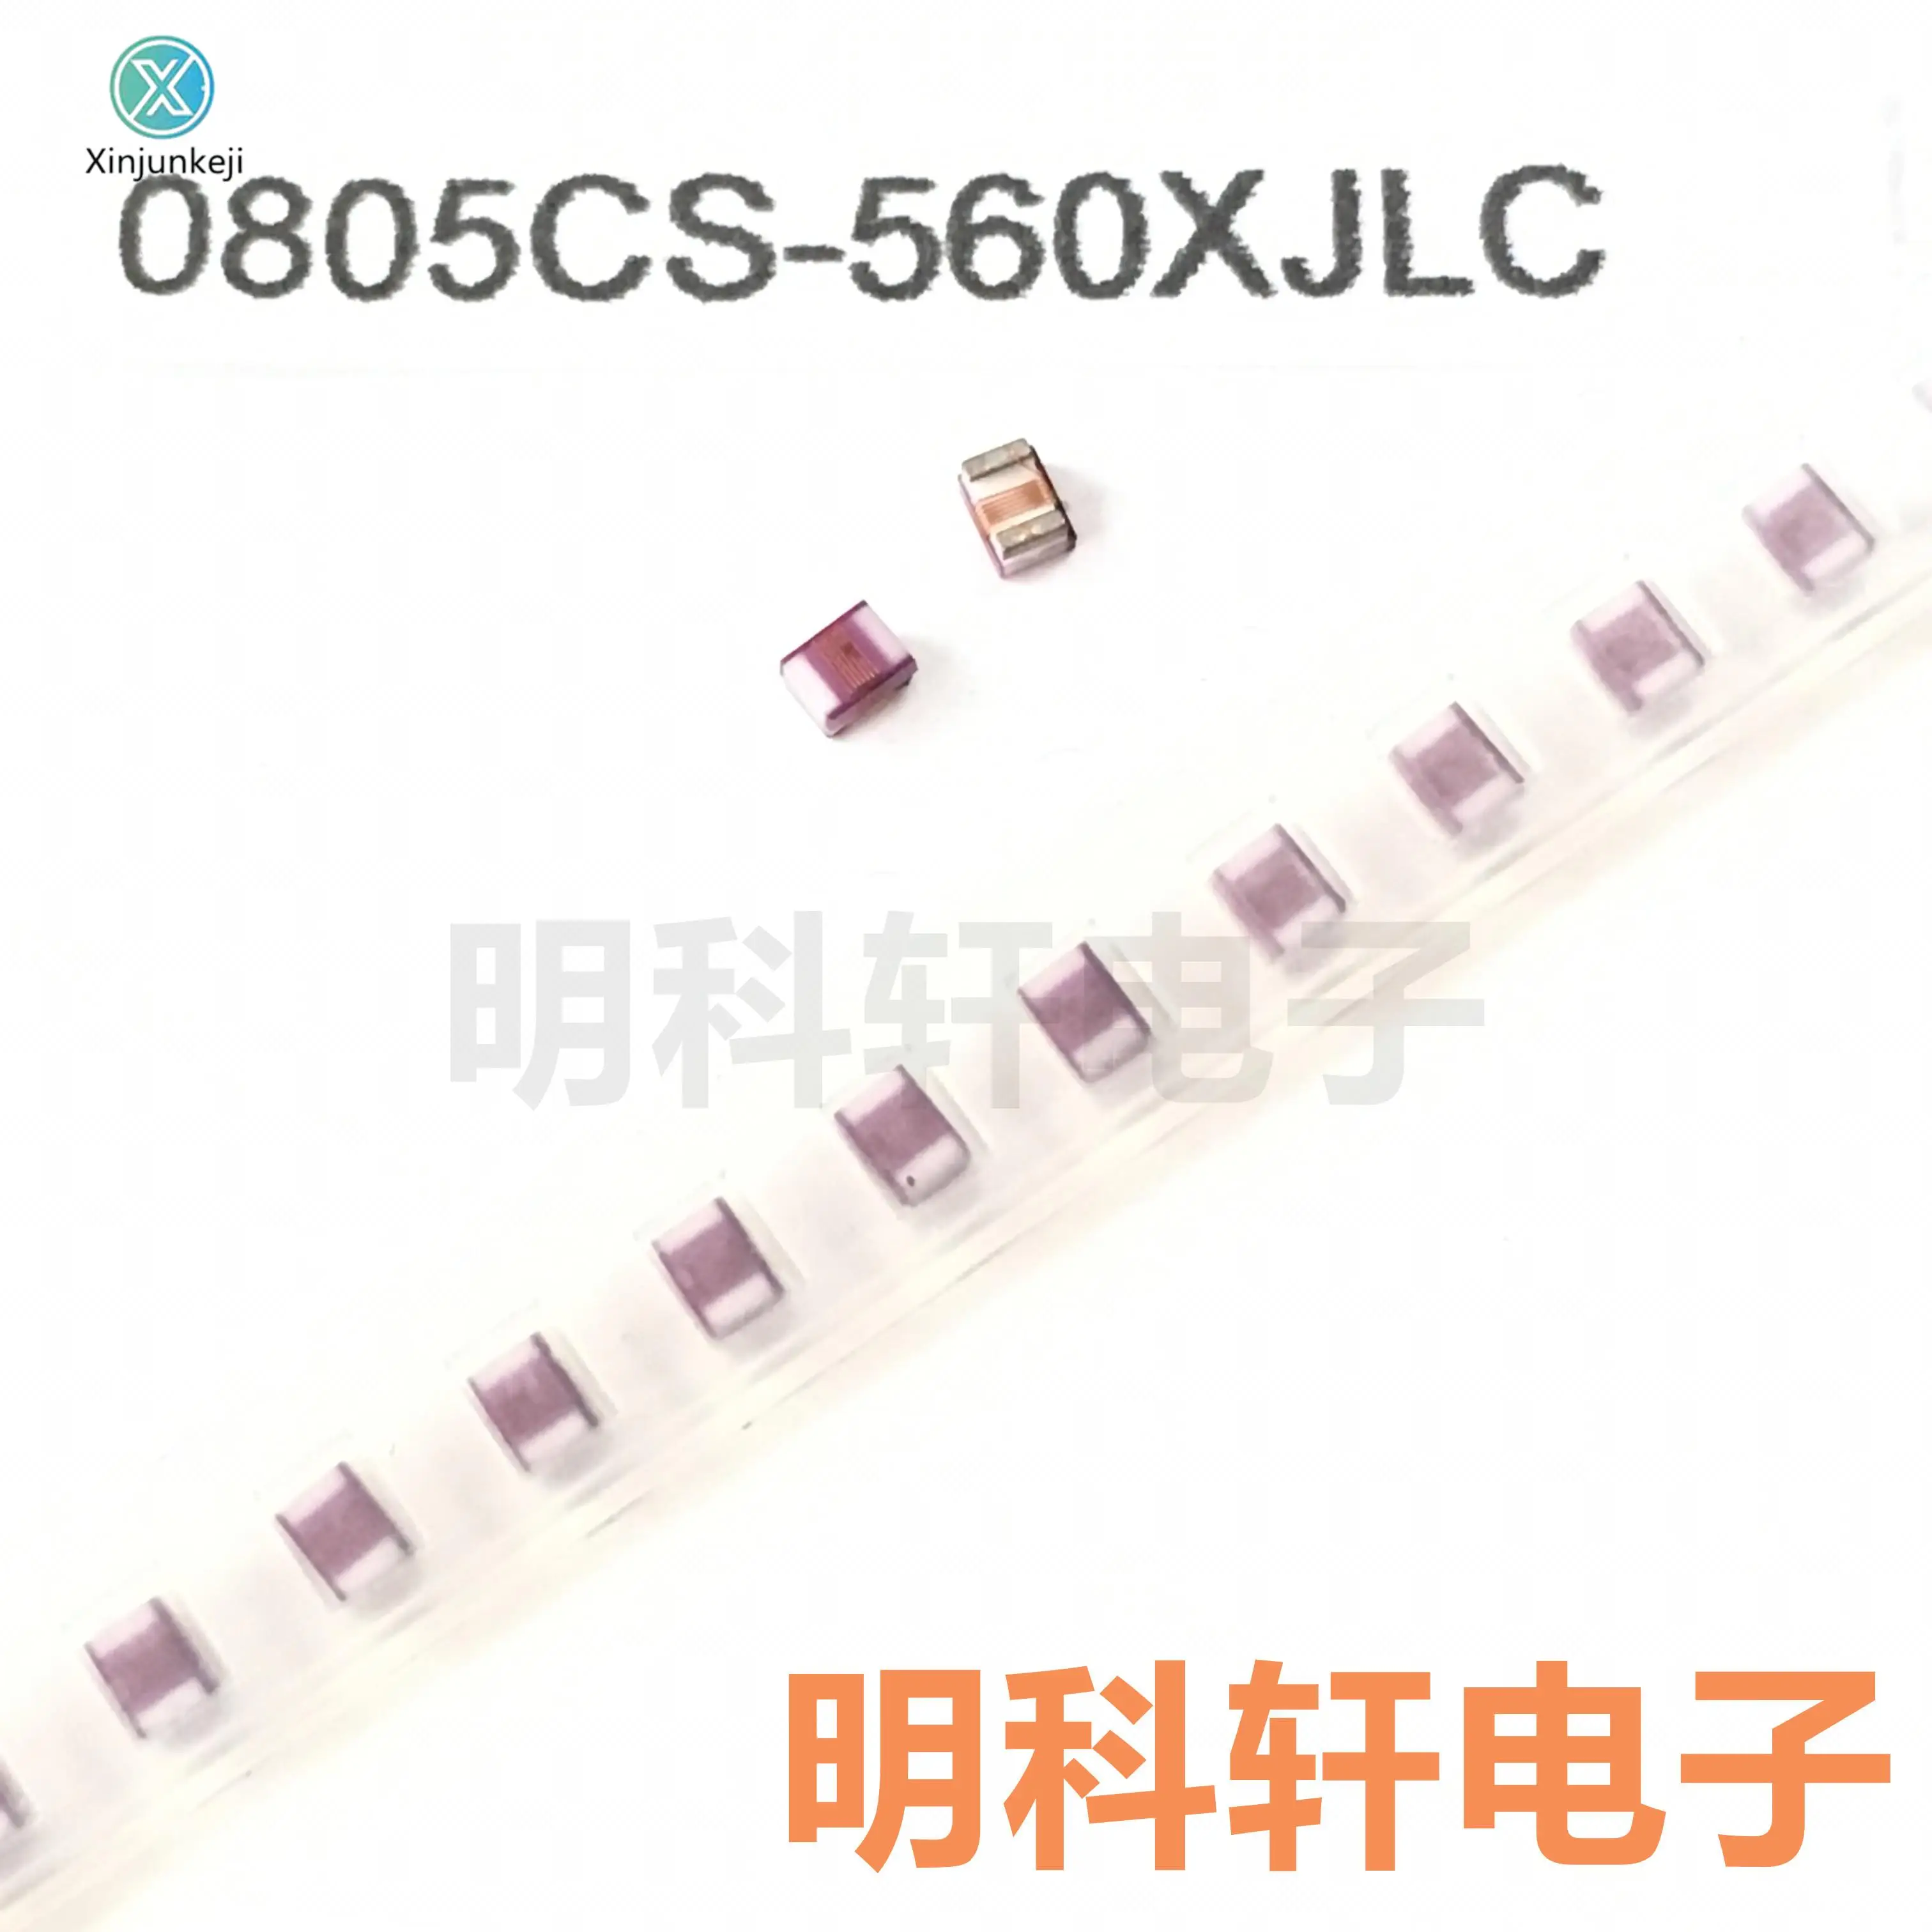 

30pcs orginal new 0805CS-560XJLC SMD high frequency wire wound inductor 0805 56NH